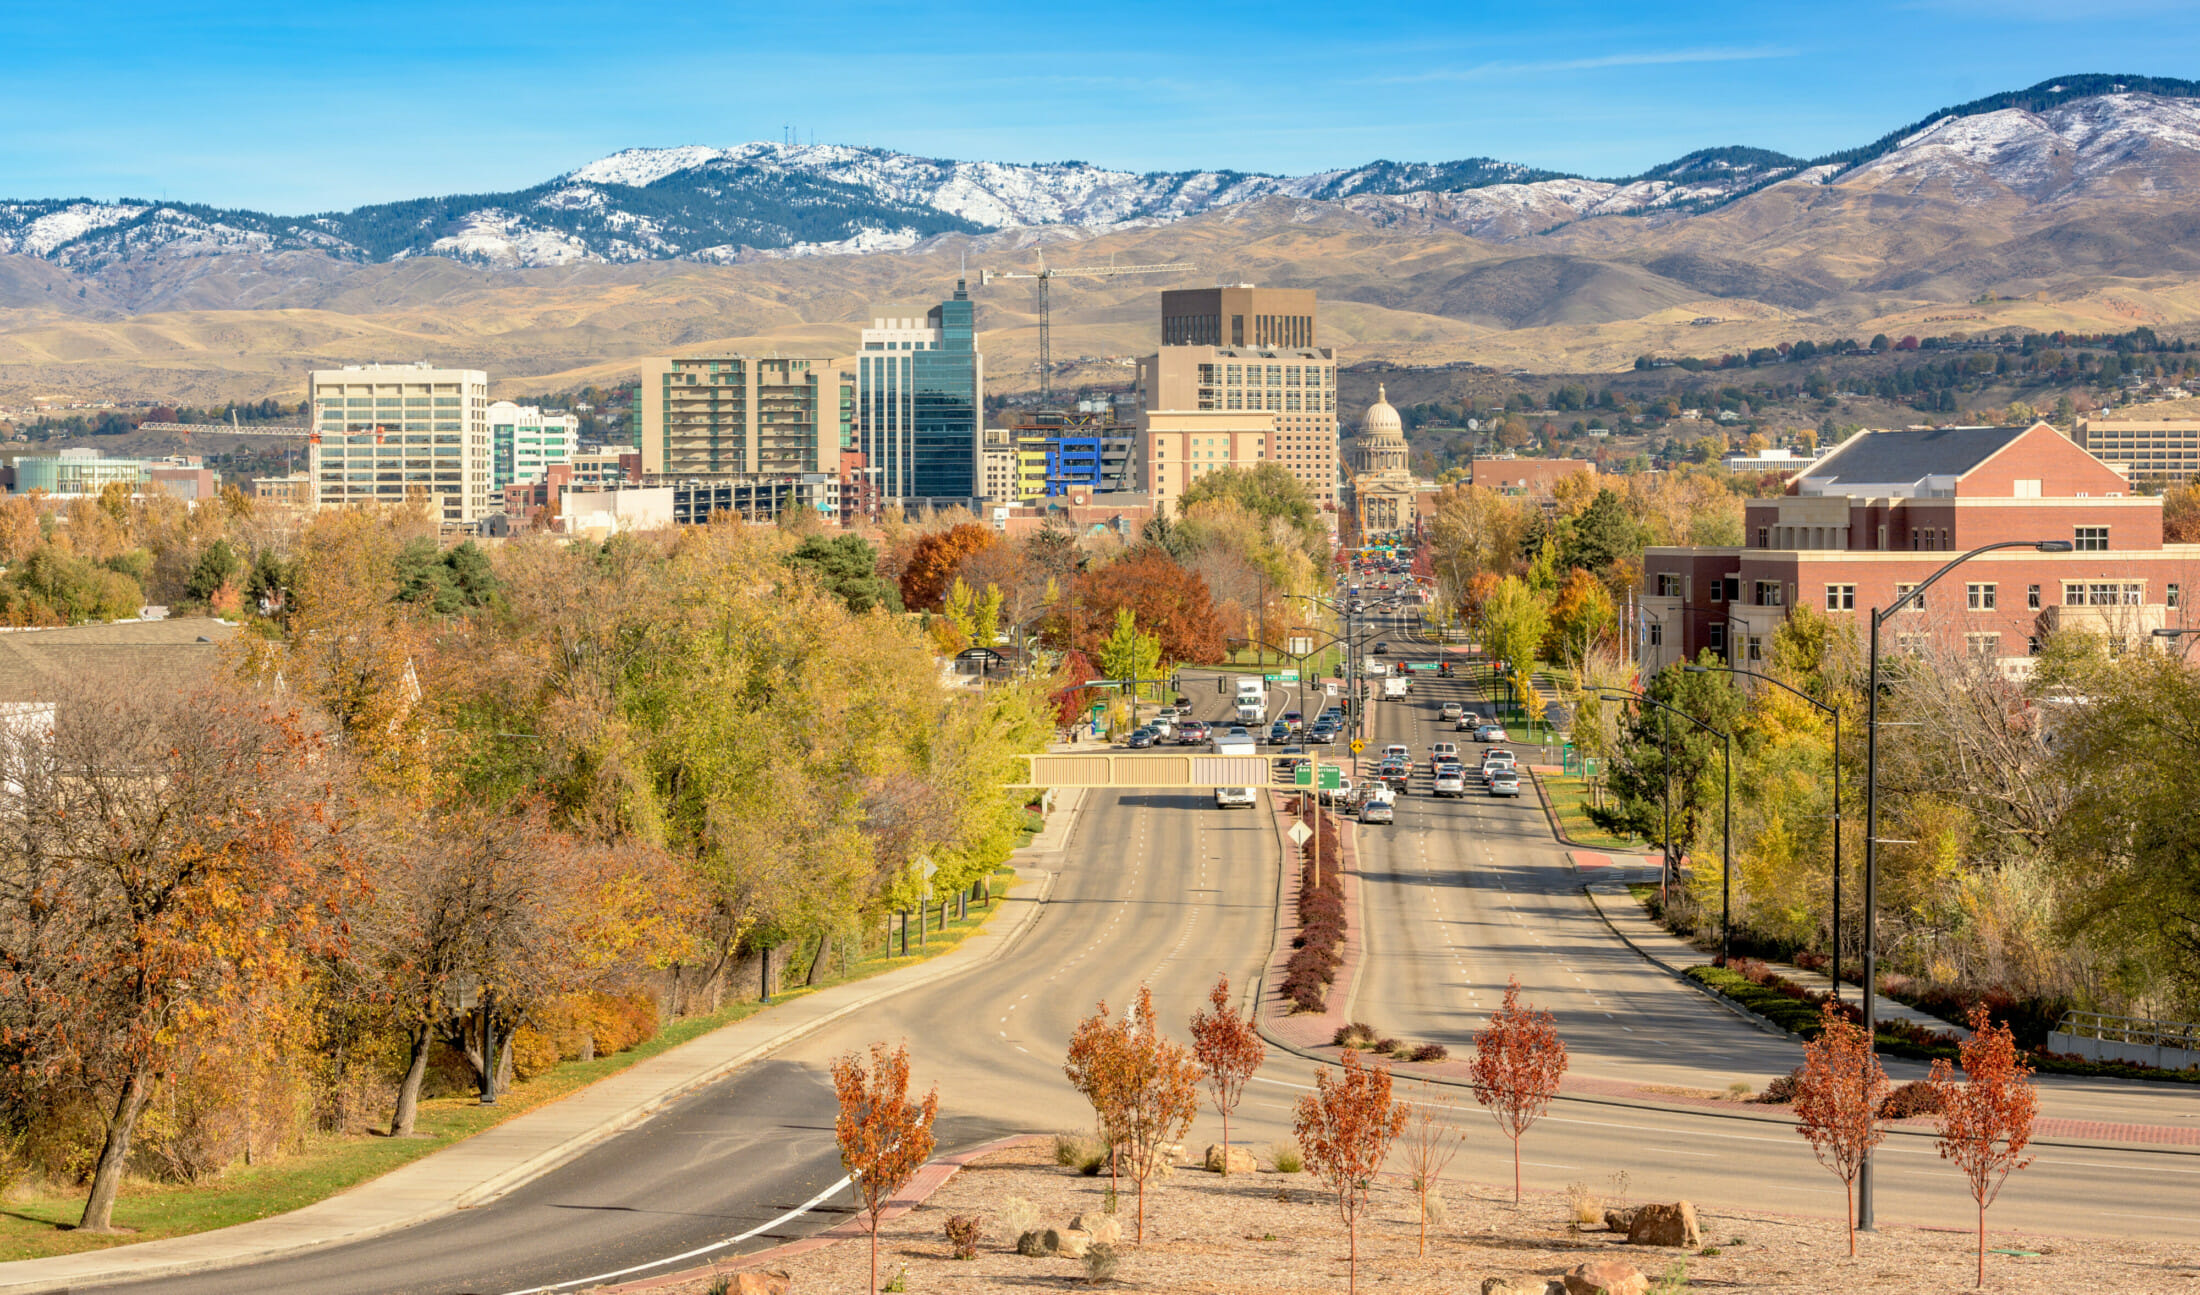 Boise, Idaho | 50 Up-and-Coming Real Estate Markets to Watch in 2019 | Buildium